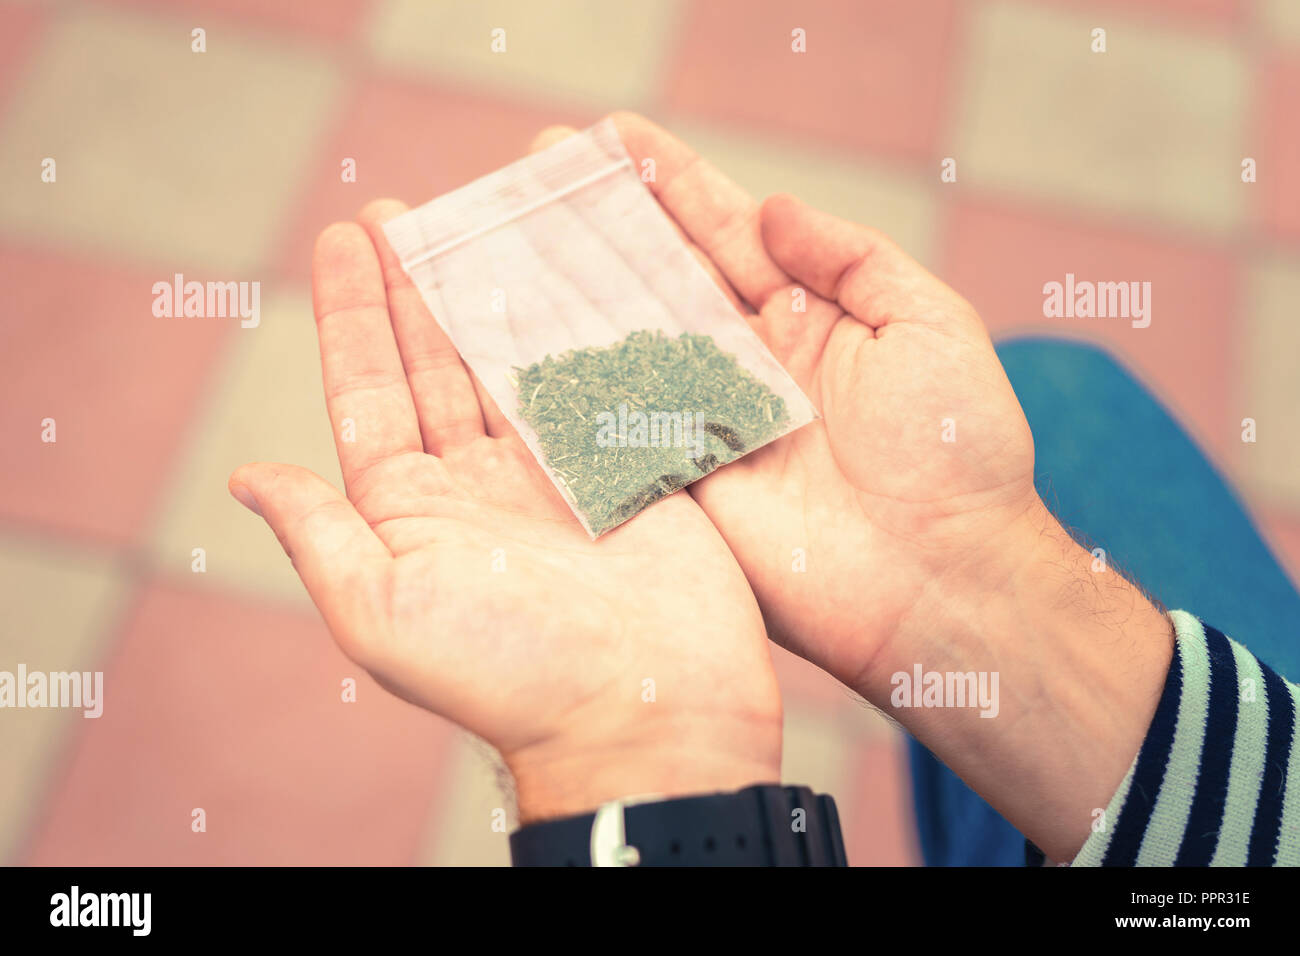 Close up of tobacco package placed on the hands of man Stock Photo